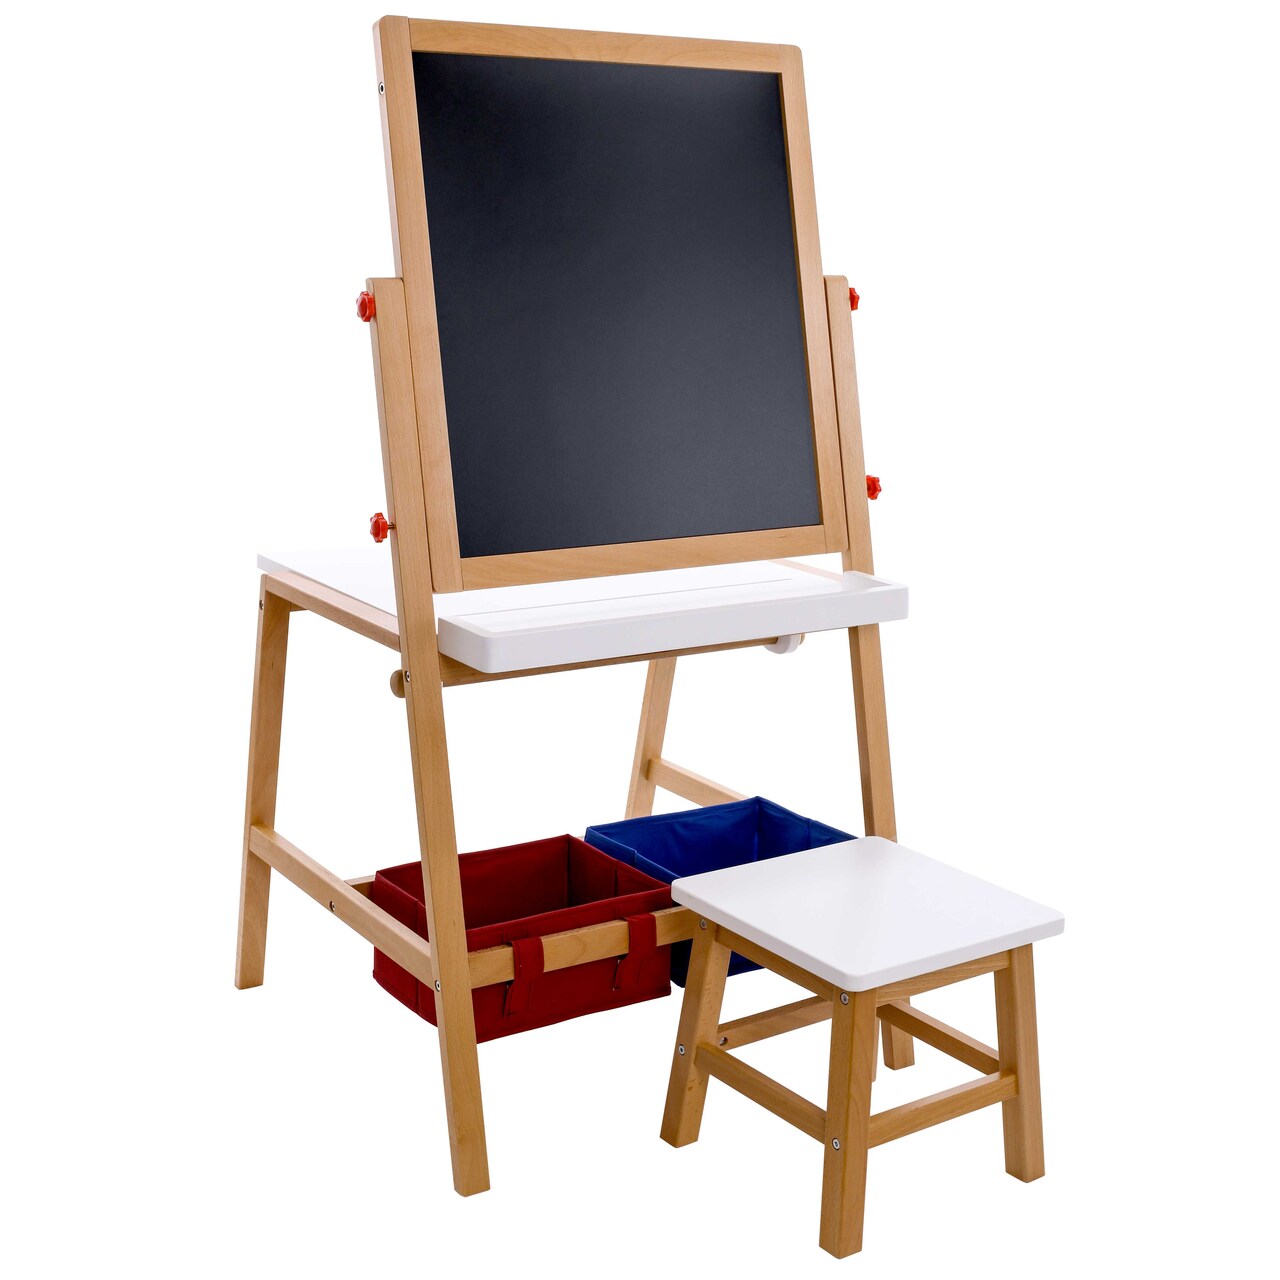 Children's Double-Sided Art Activity Flip Easel Board with